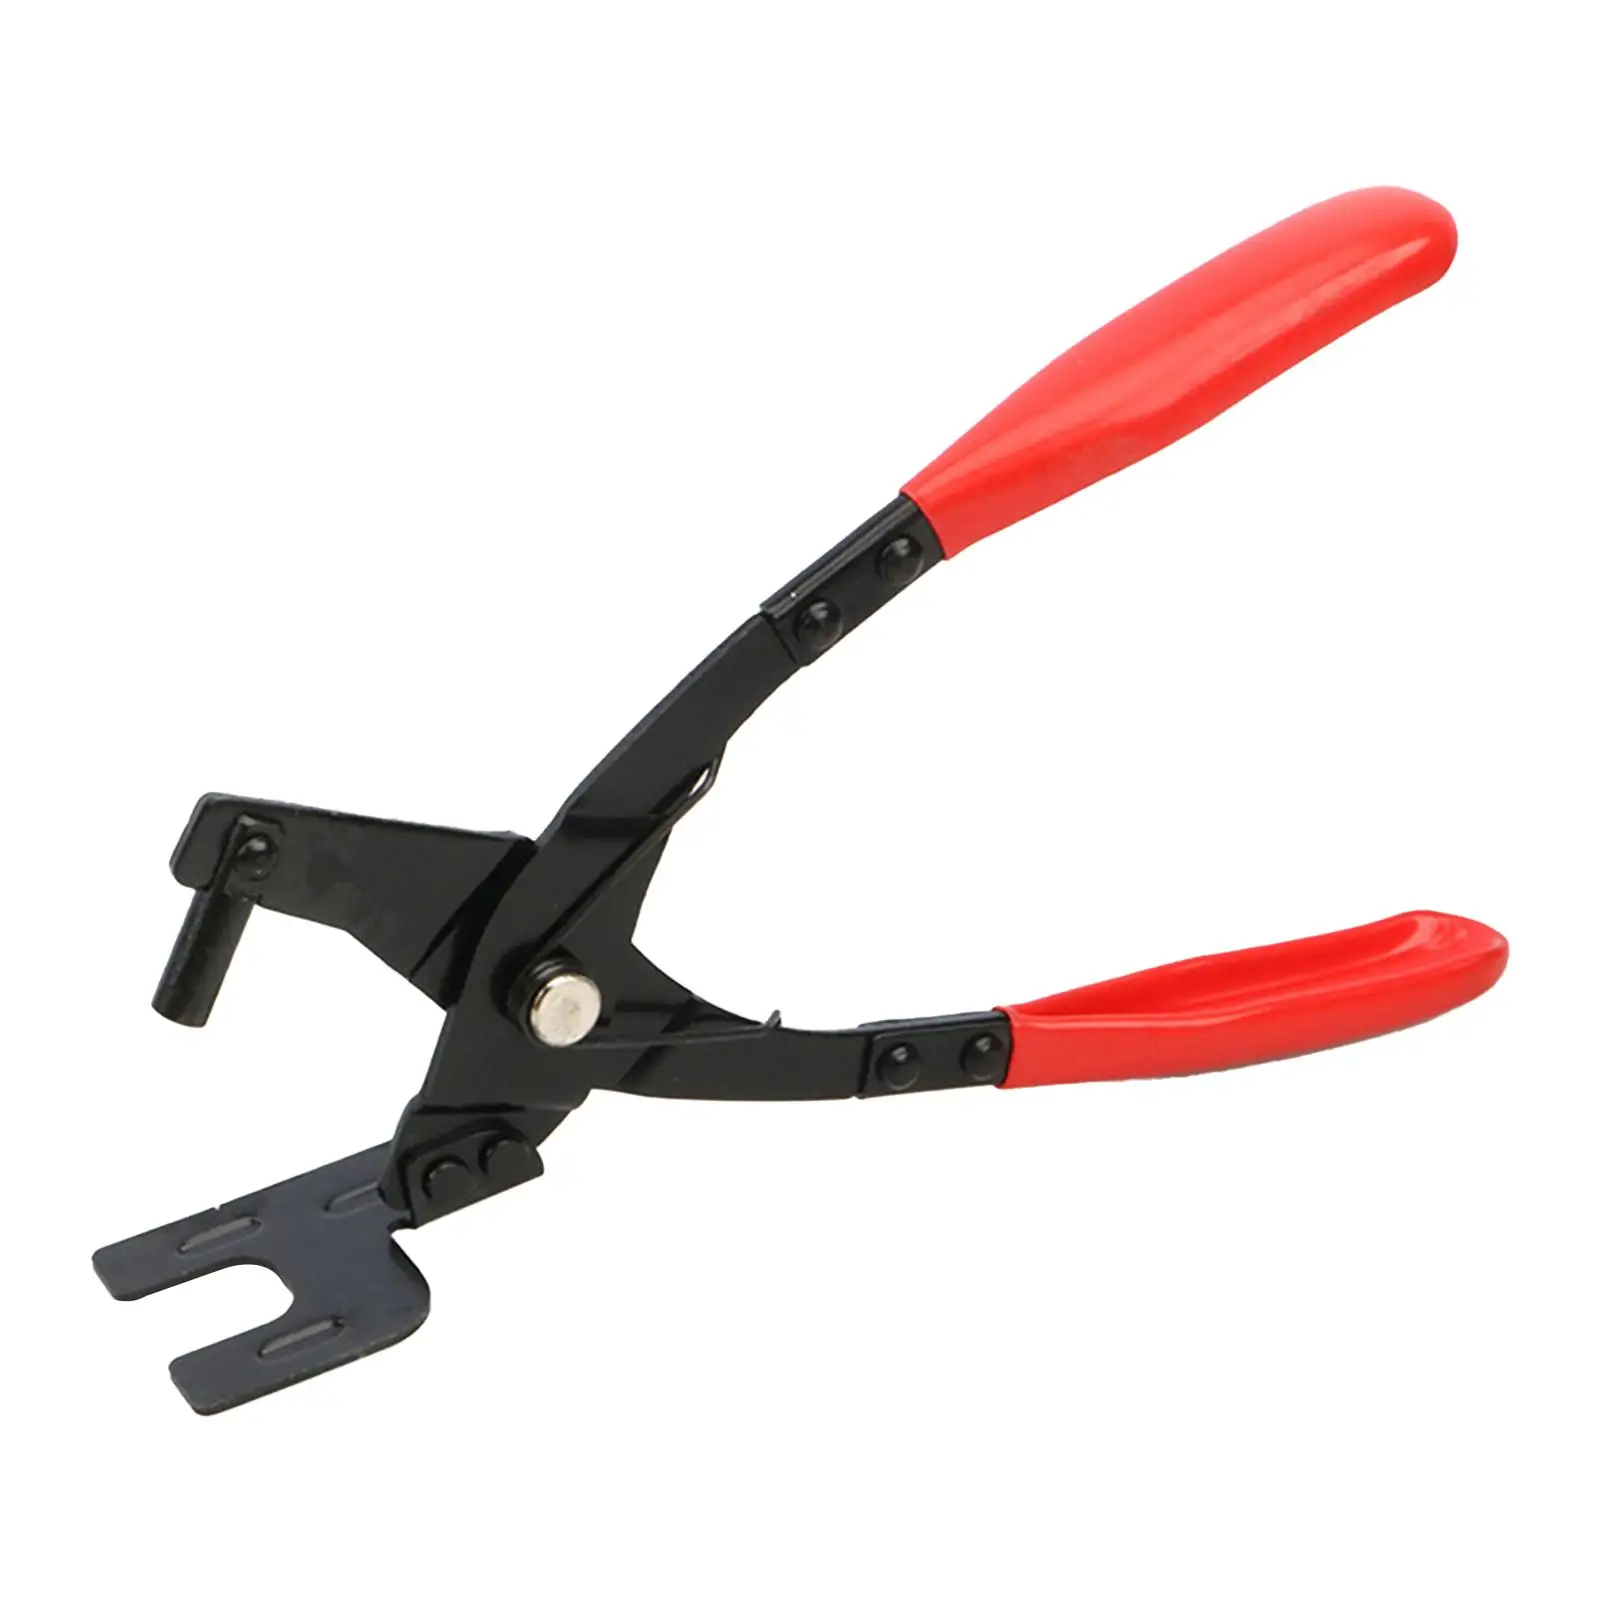 Car Exhaust Hanger Removal Pliers Separates Rubber Supports from Exhaust Hanger